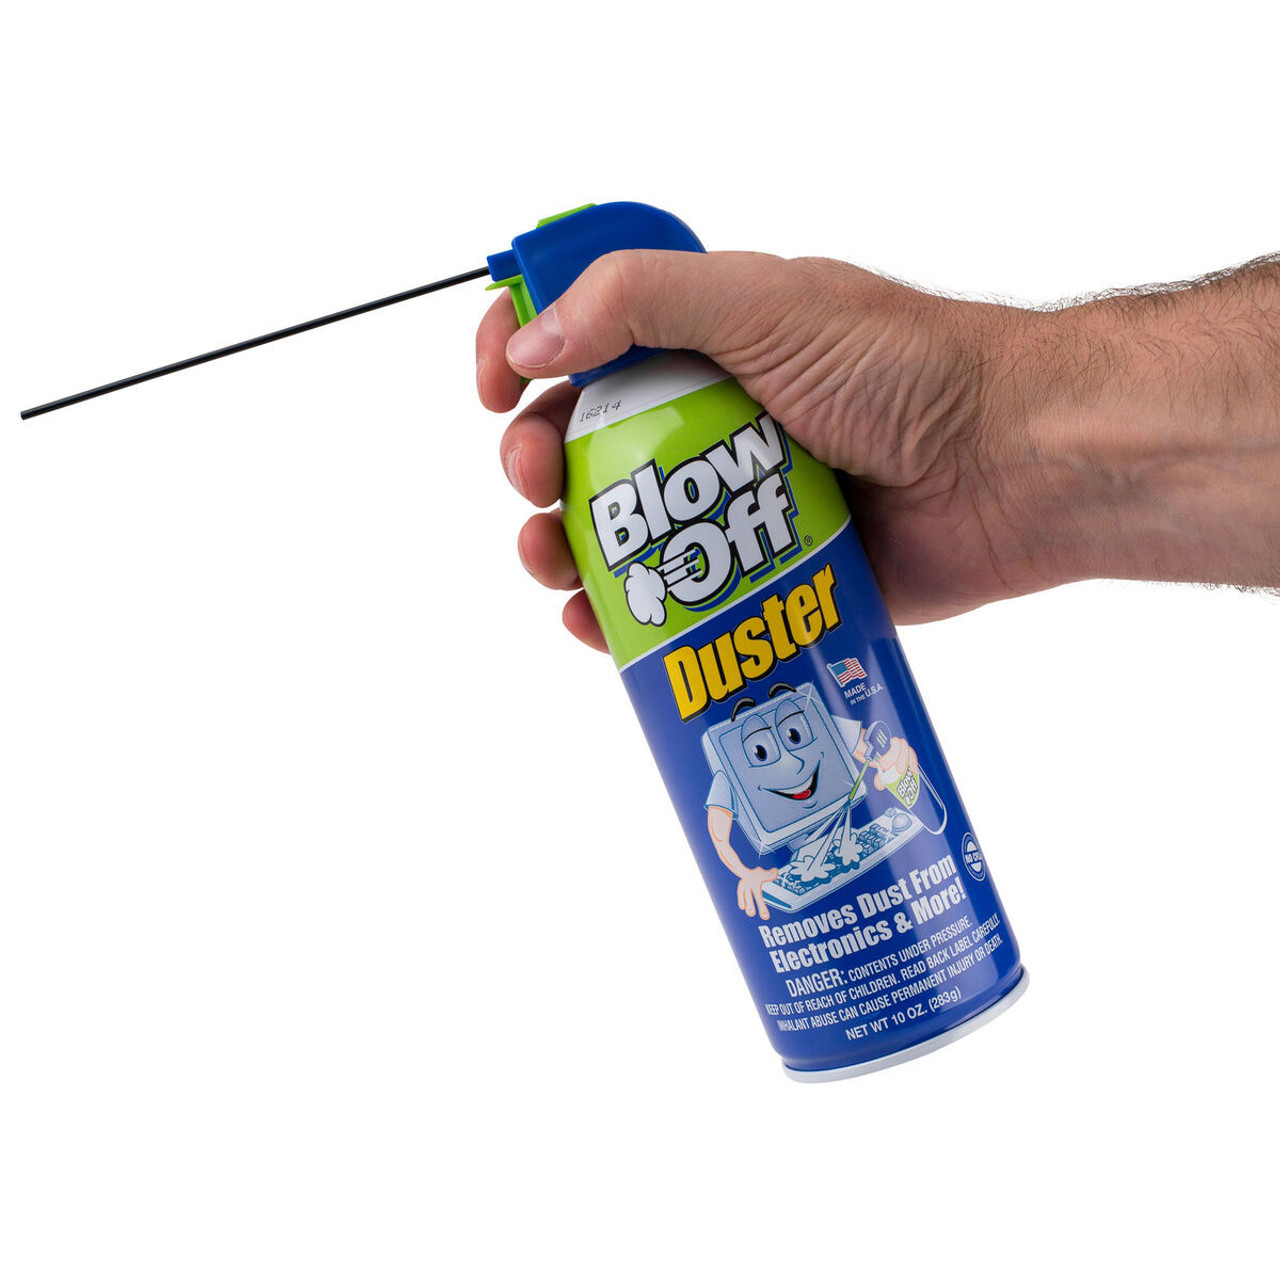 Blow Off Canned Air Duster - 10 oz